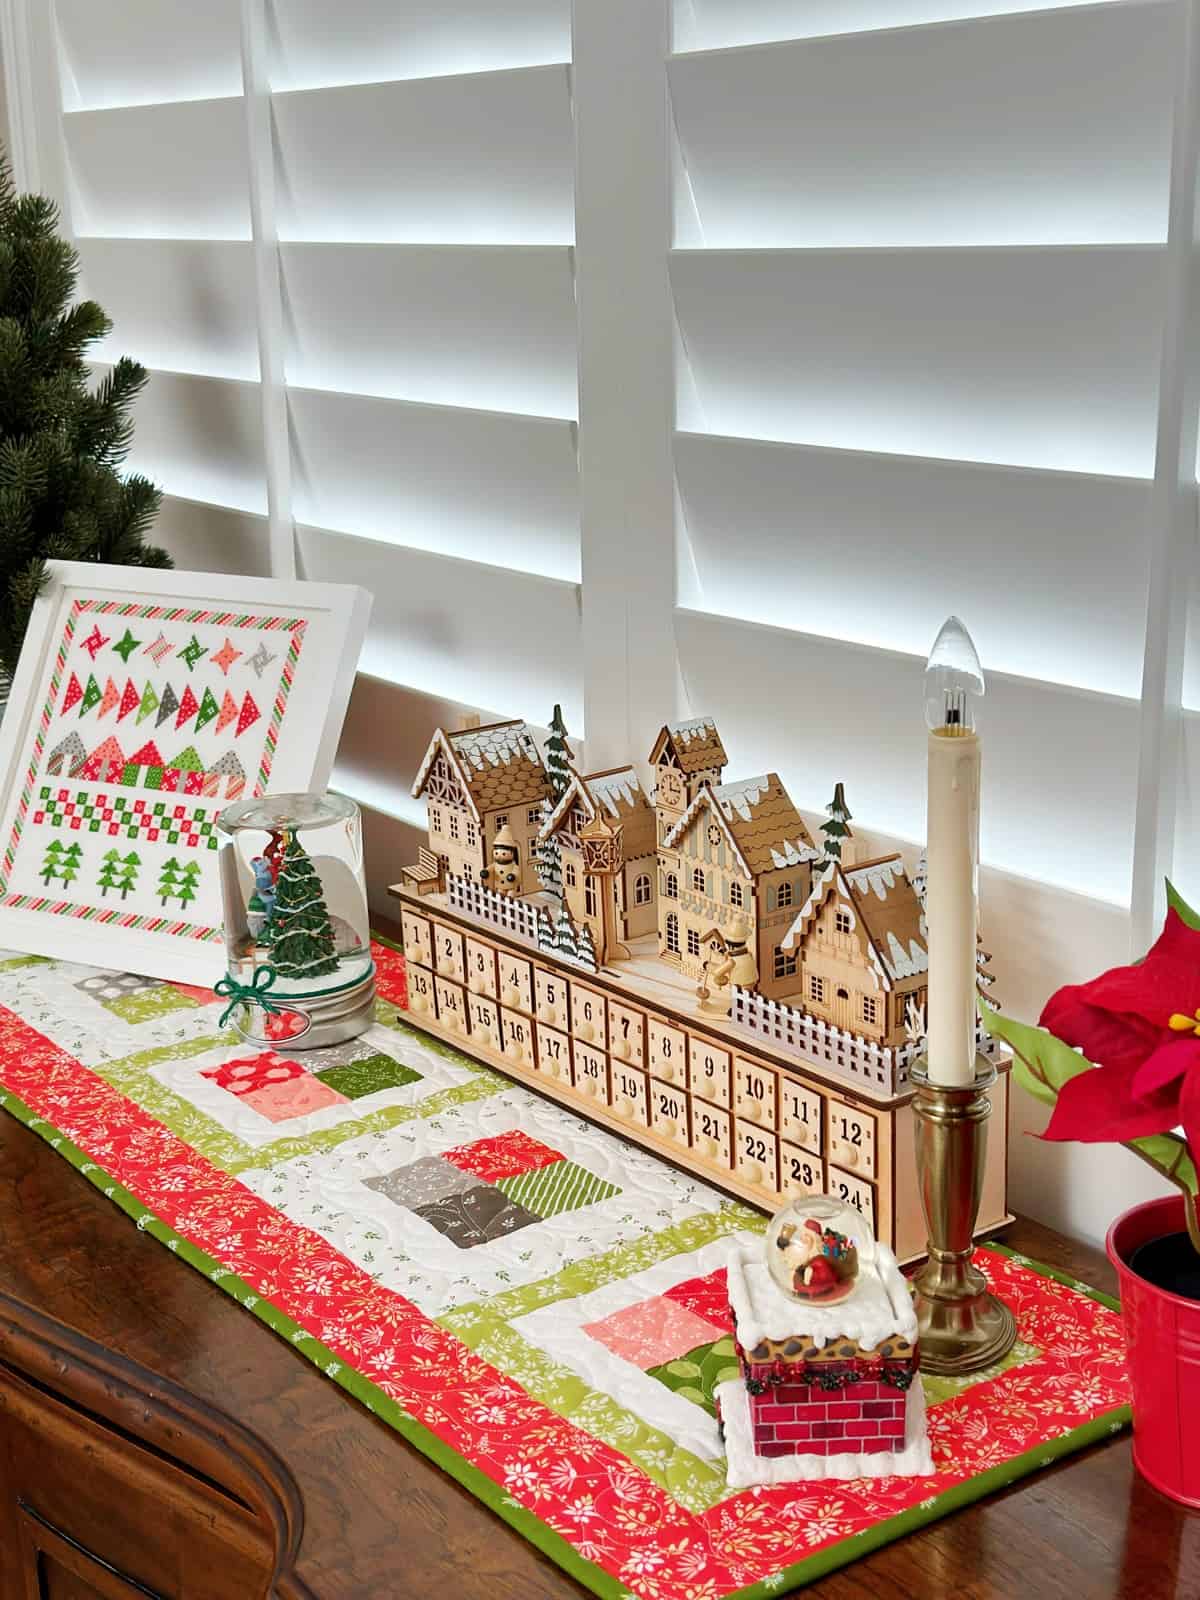 Christmas display with framed stitcher and advent display